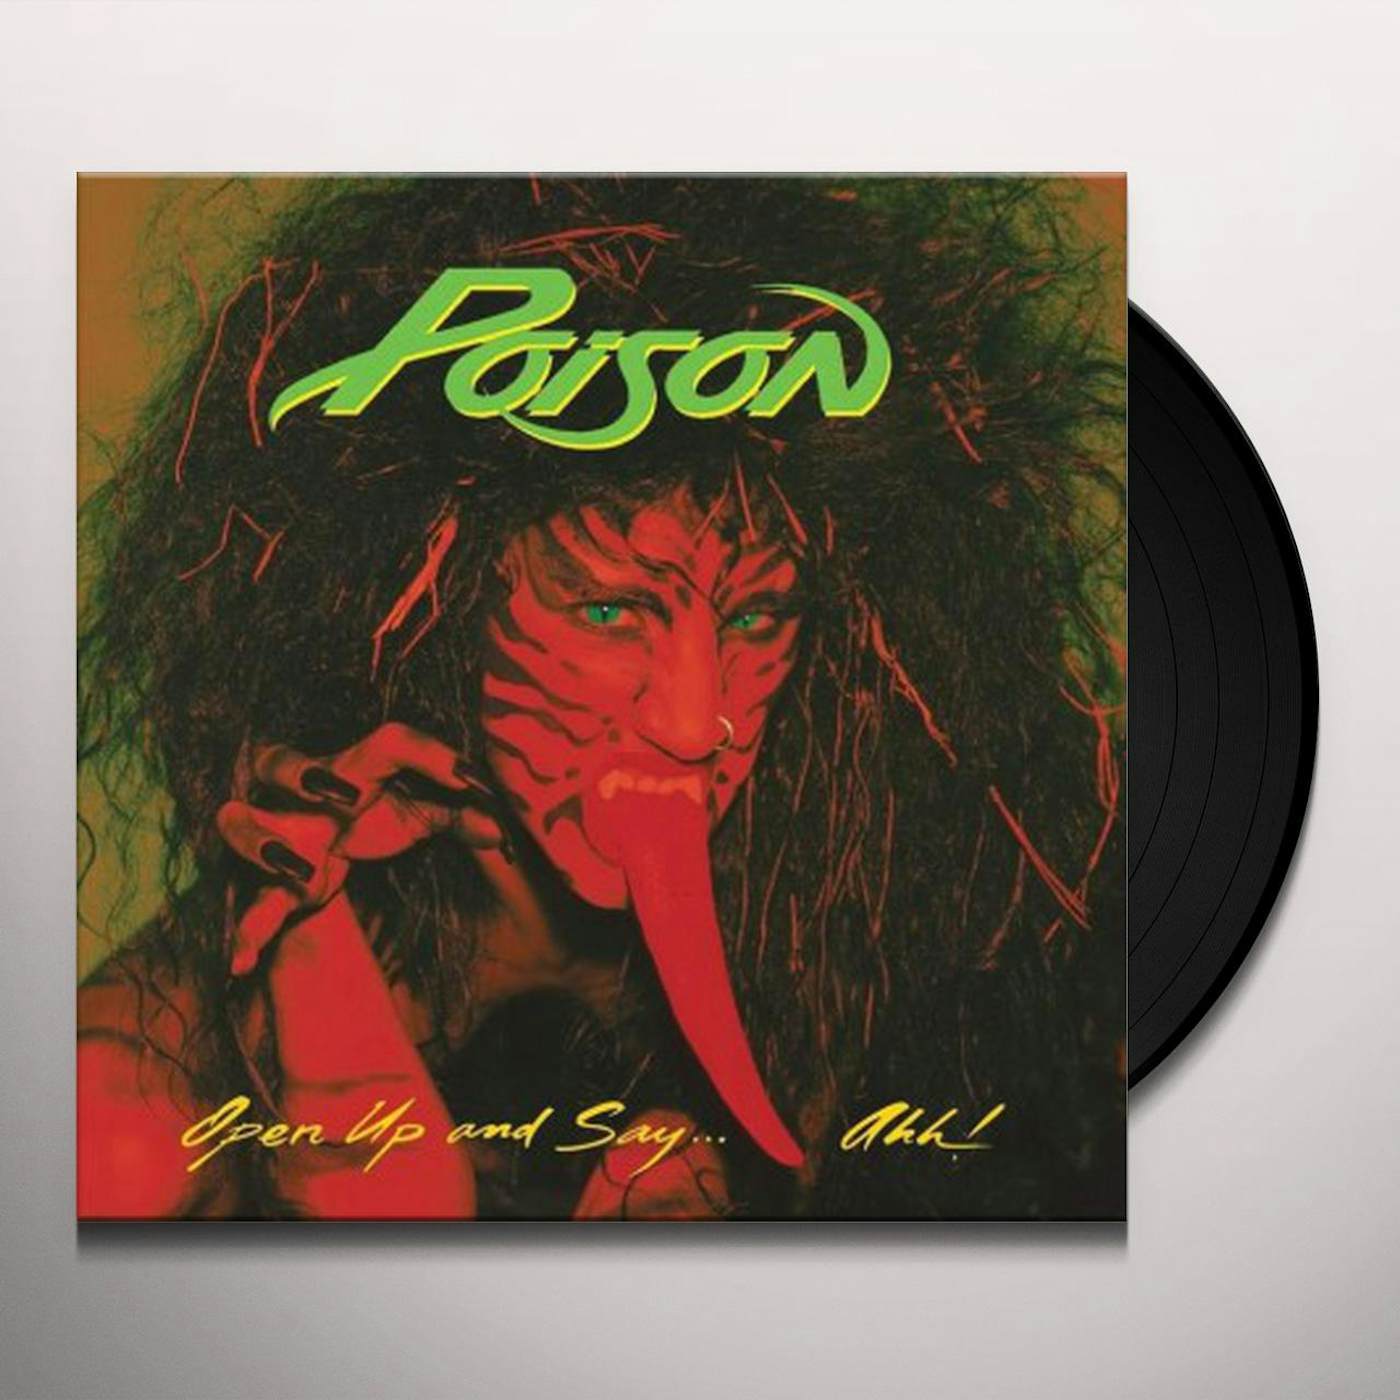 Poison OPEN UP & SAY AHH Vinyl Record